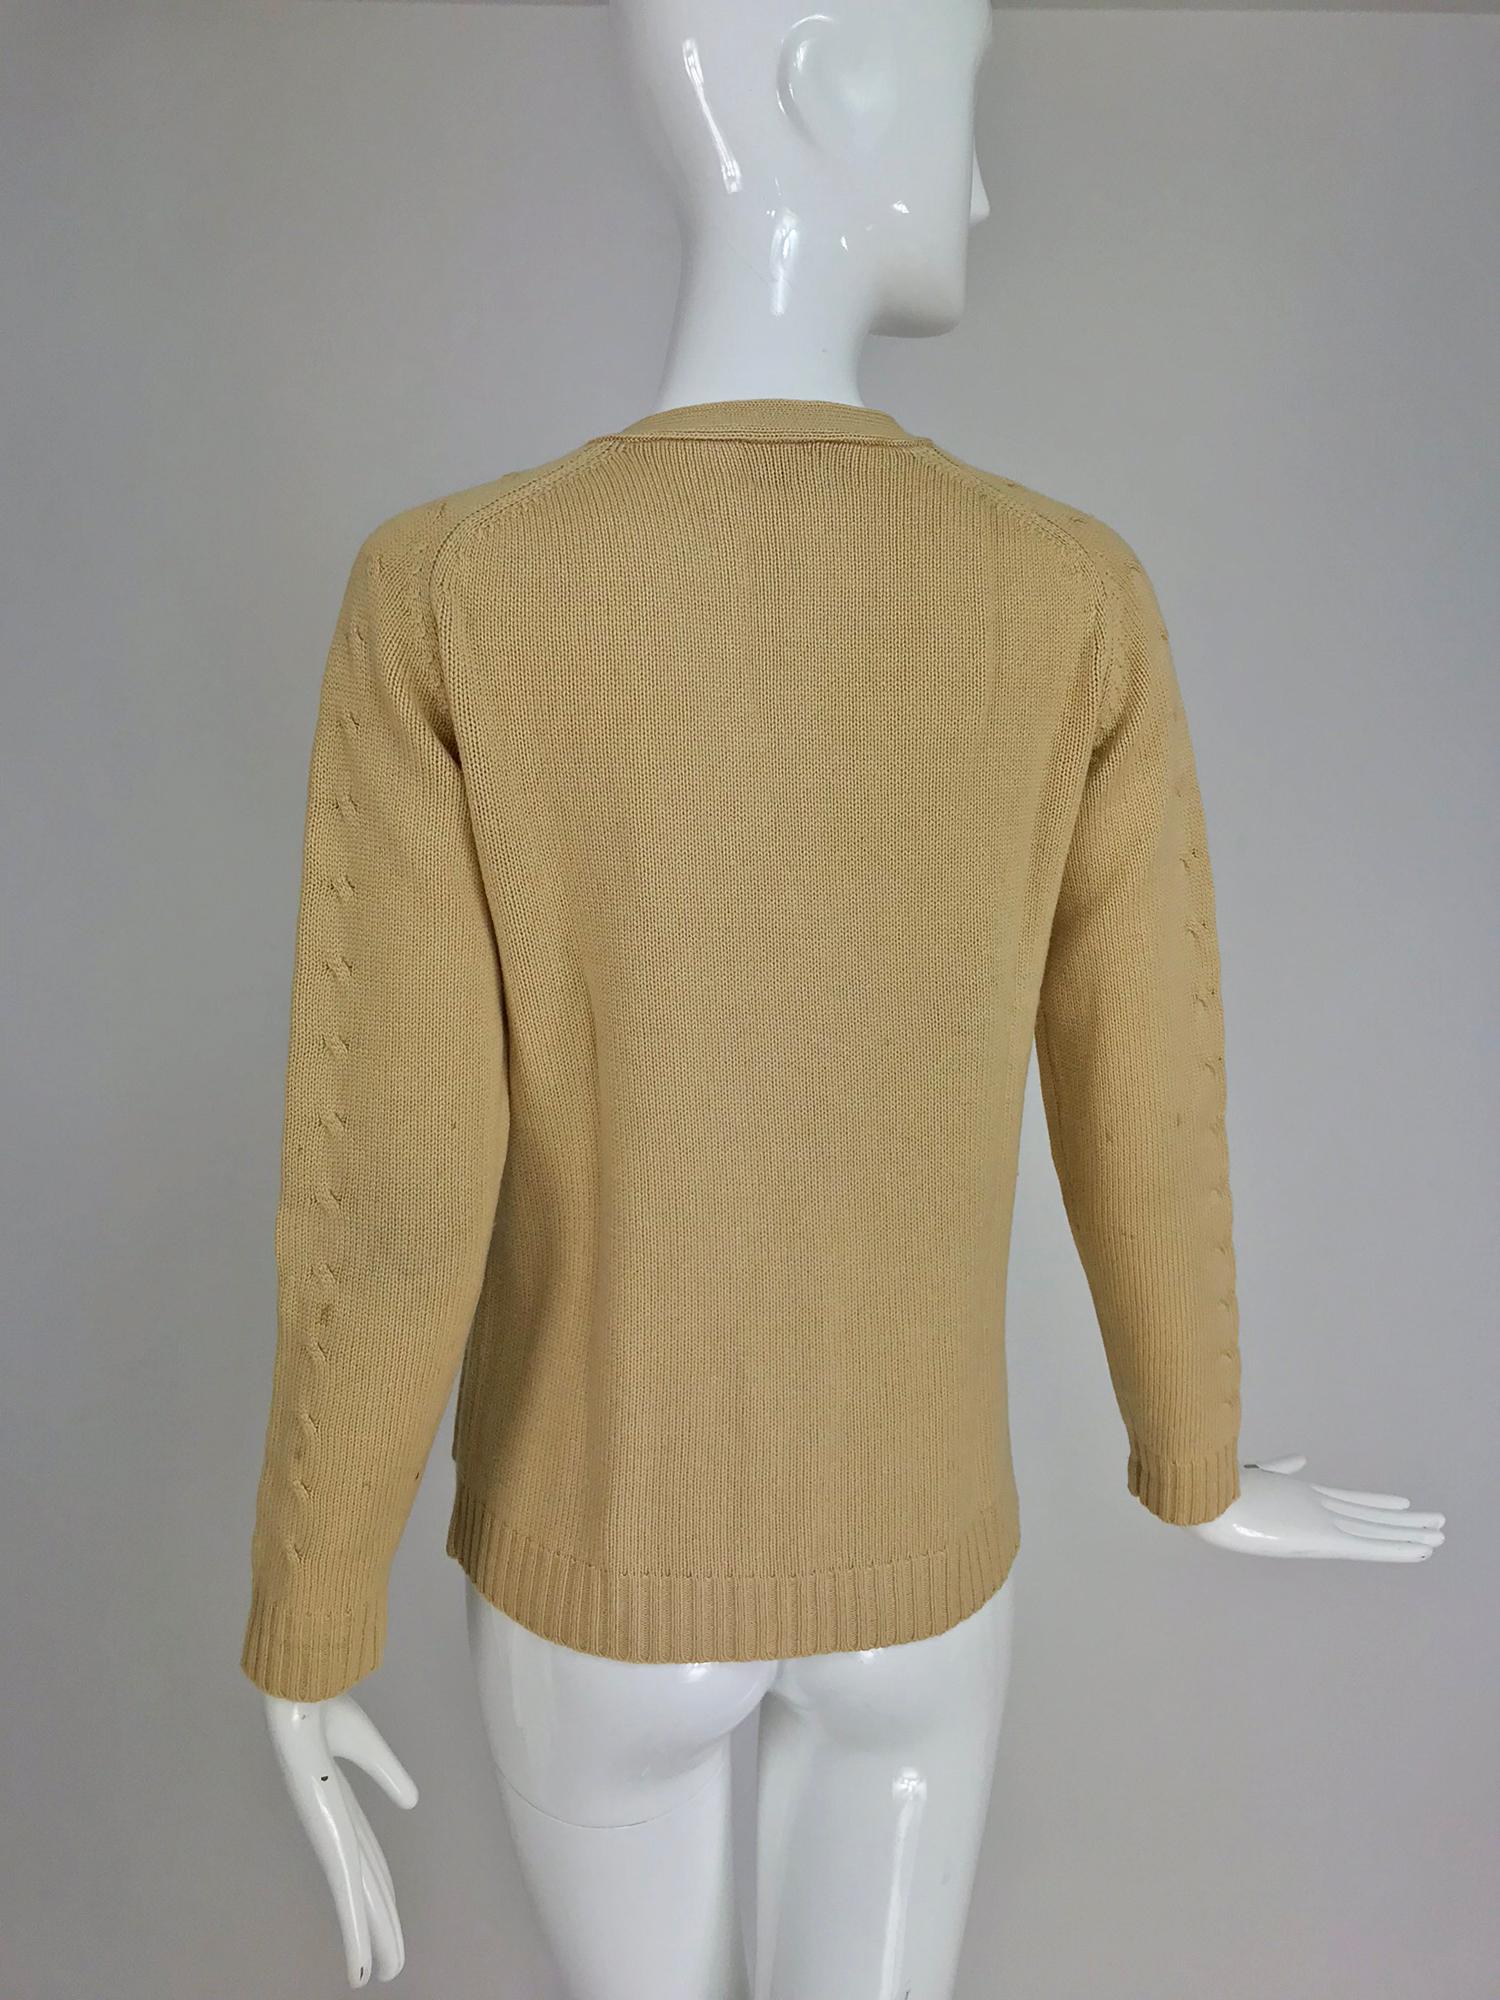 Women's Hermes tan cashmere silk cable knit cardigan sweater 1960s For Sale